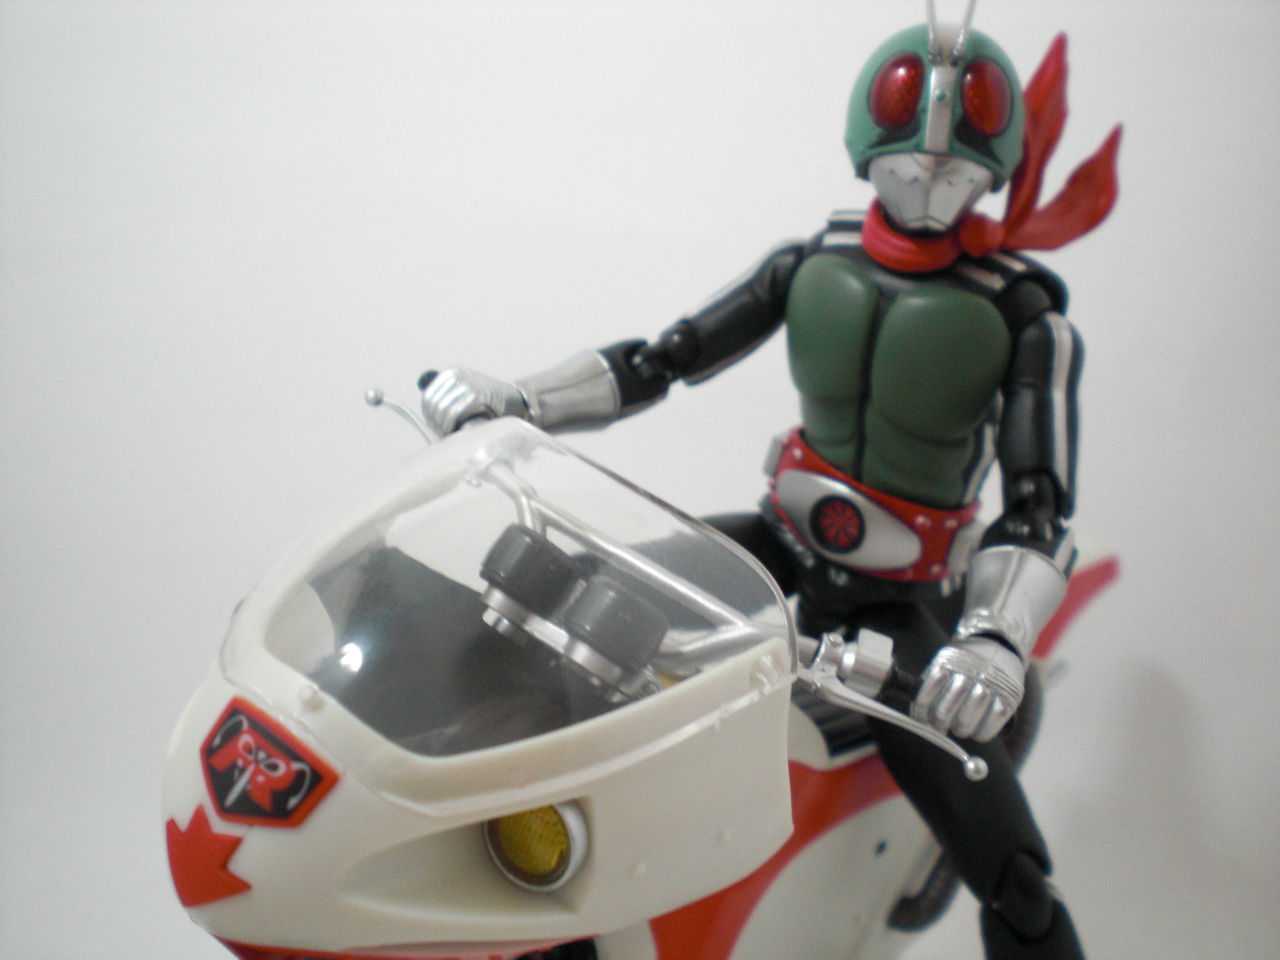 S.H.Figuarts 仮面ライダー新一号＆新サイクロン号セット レビュー